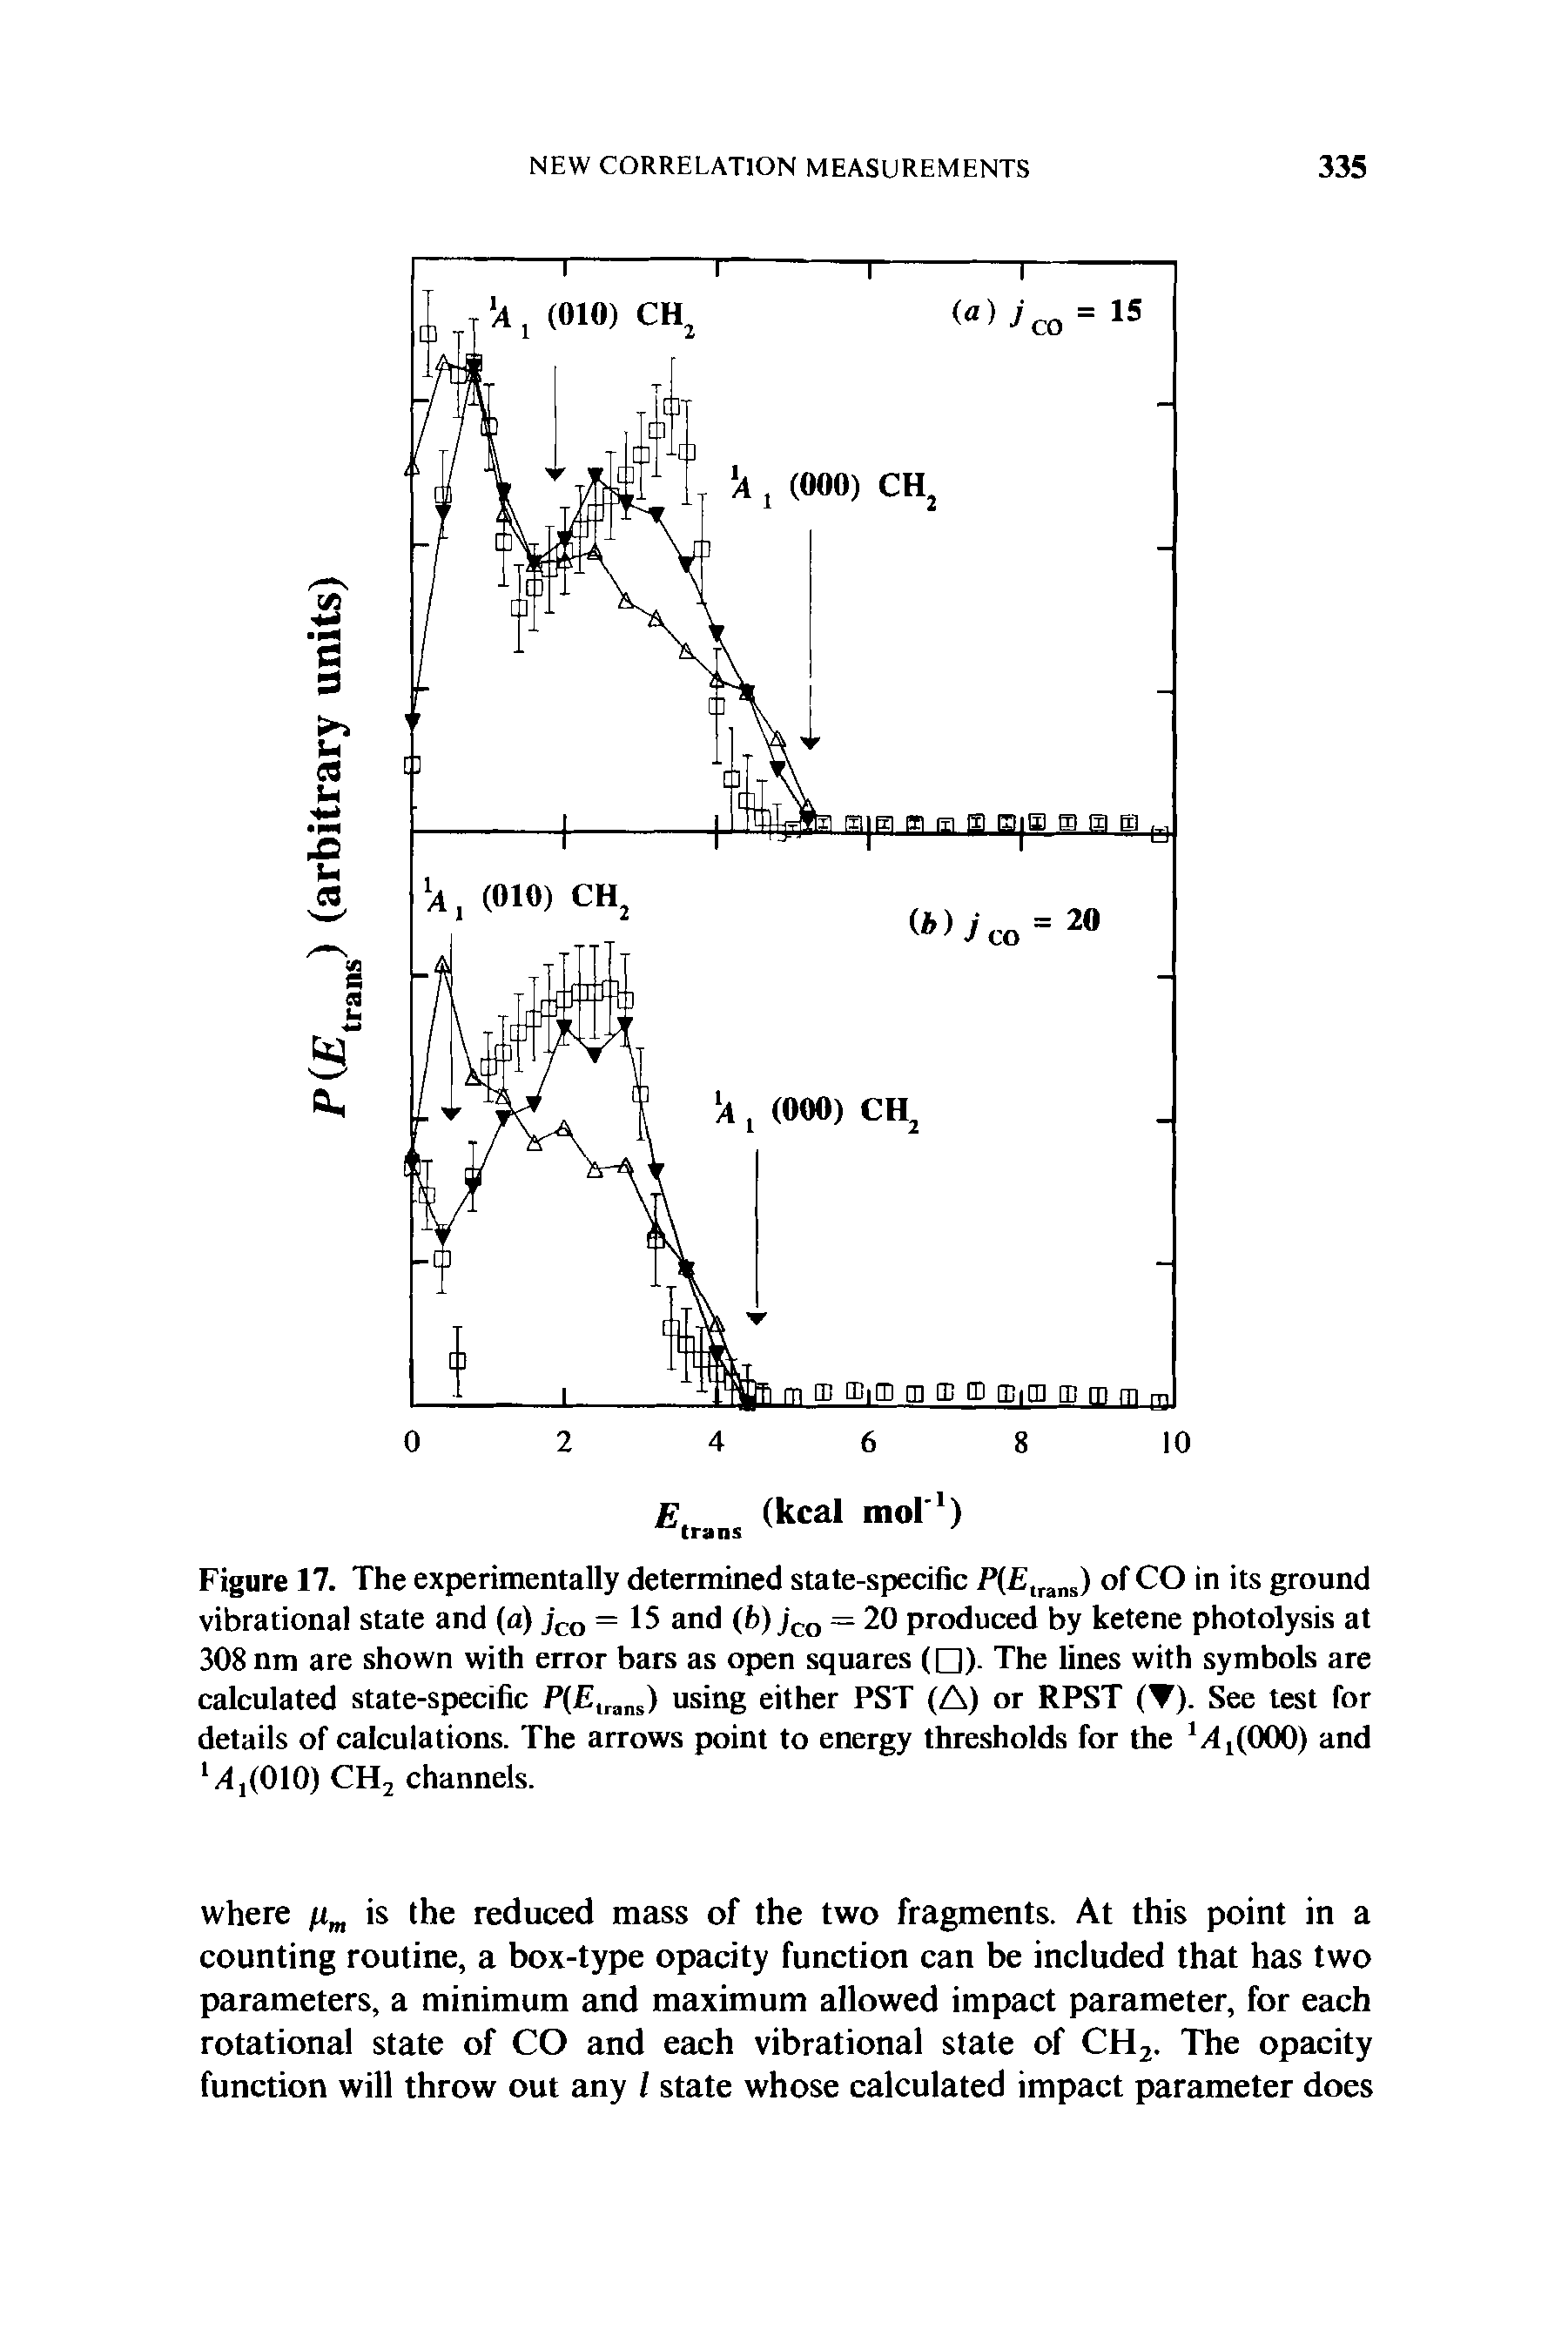 Figure 17. The experimentally determined state-specific P( trans) of CO in its ground vibrational state and (a) jco =15 and (i>) jco = 20 produced by ketene photolysis at 308 nm are shown with error bars as open squares ( ). The lines with symbols are calculated state-specific P( lrans) using either PST (A) or RPST (Y). See test for details of calculations. The arrows point to energy thresholds for the 1>41(000) and /l] (010) CH2 channels.